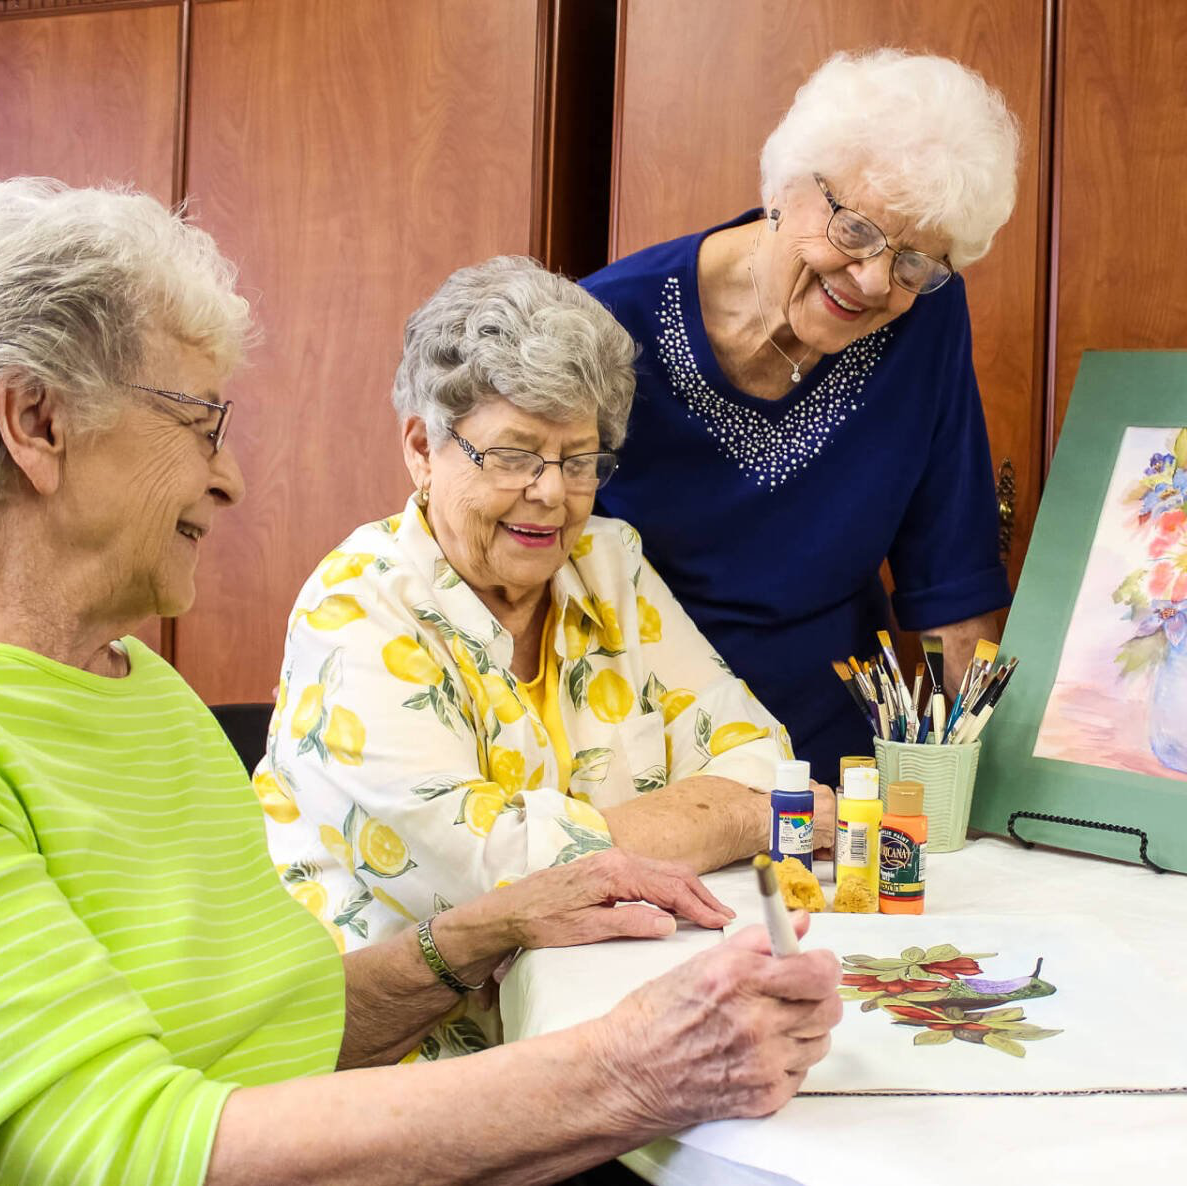 ladies painting a mural of flowers together in the Village Place craft room